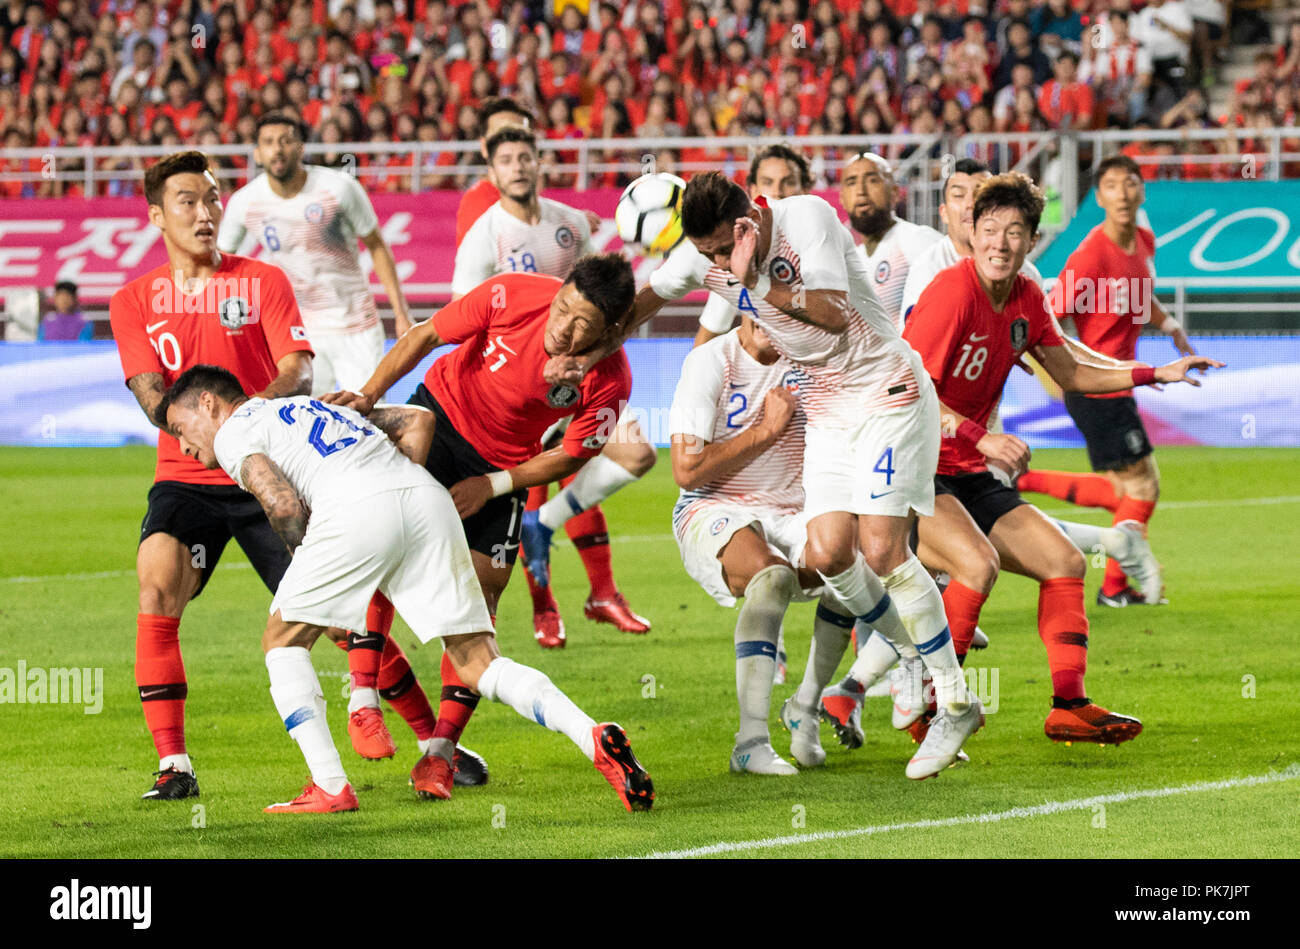 Suwon, South Korea. 11th Sep, 2018. Hwang Hee-chan (front 3rd L) of South Korea vies with Chile's Mauricio Isla (front 1st R) during a friendly soccer match between South Korea and Chile at Suwon World Cup Stadium in Suwon, South Korea, on Sept. 11, 2018. The match ended with a 0-0 draw. Credit: Lee Sang-ho/Xinhua/Alamy Live News Stock Photo